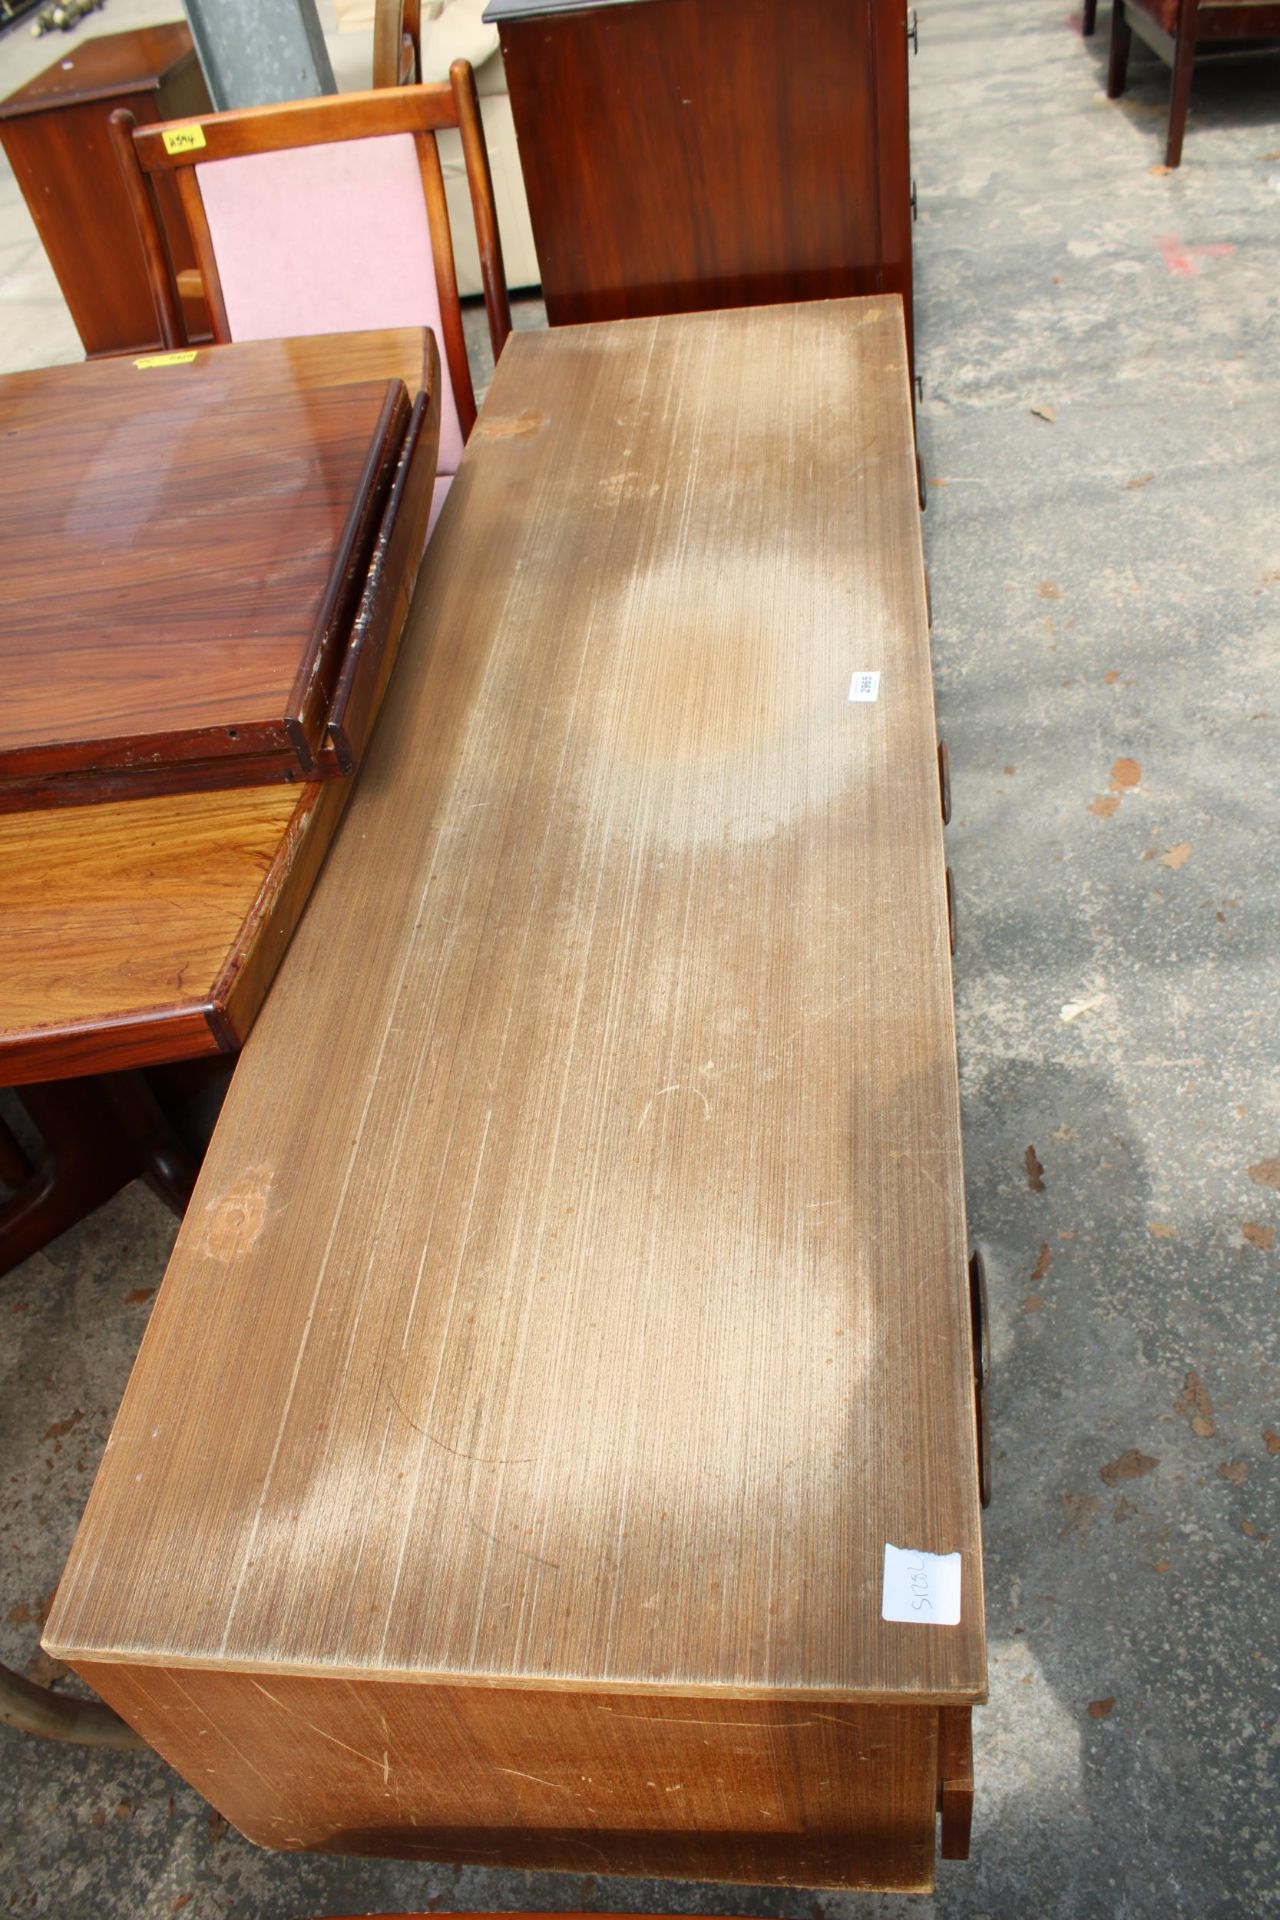 A RETRO TEAK EFFECT DRESSING TABLE BASE, 60" WIDE - Image 3 of 3